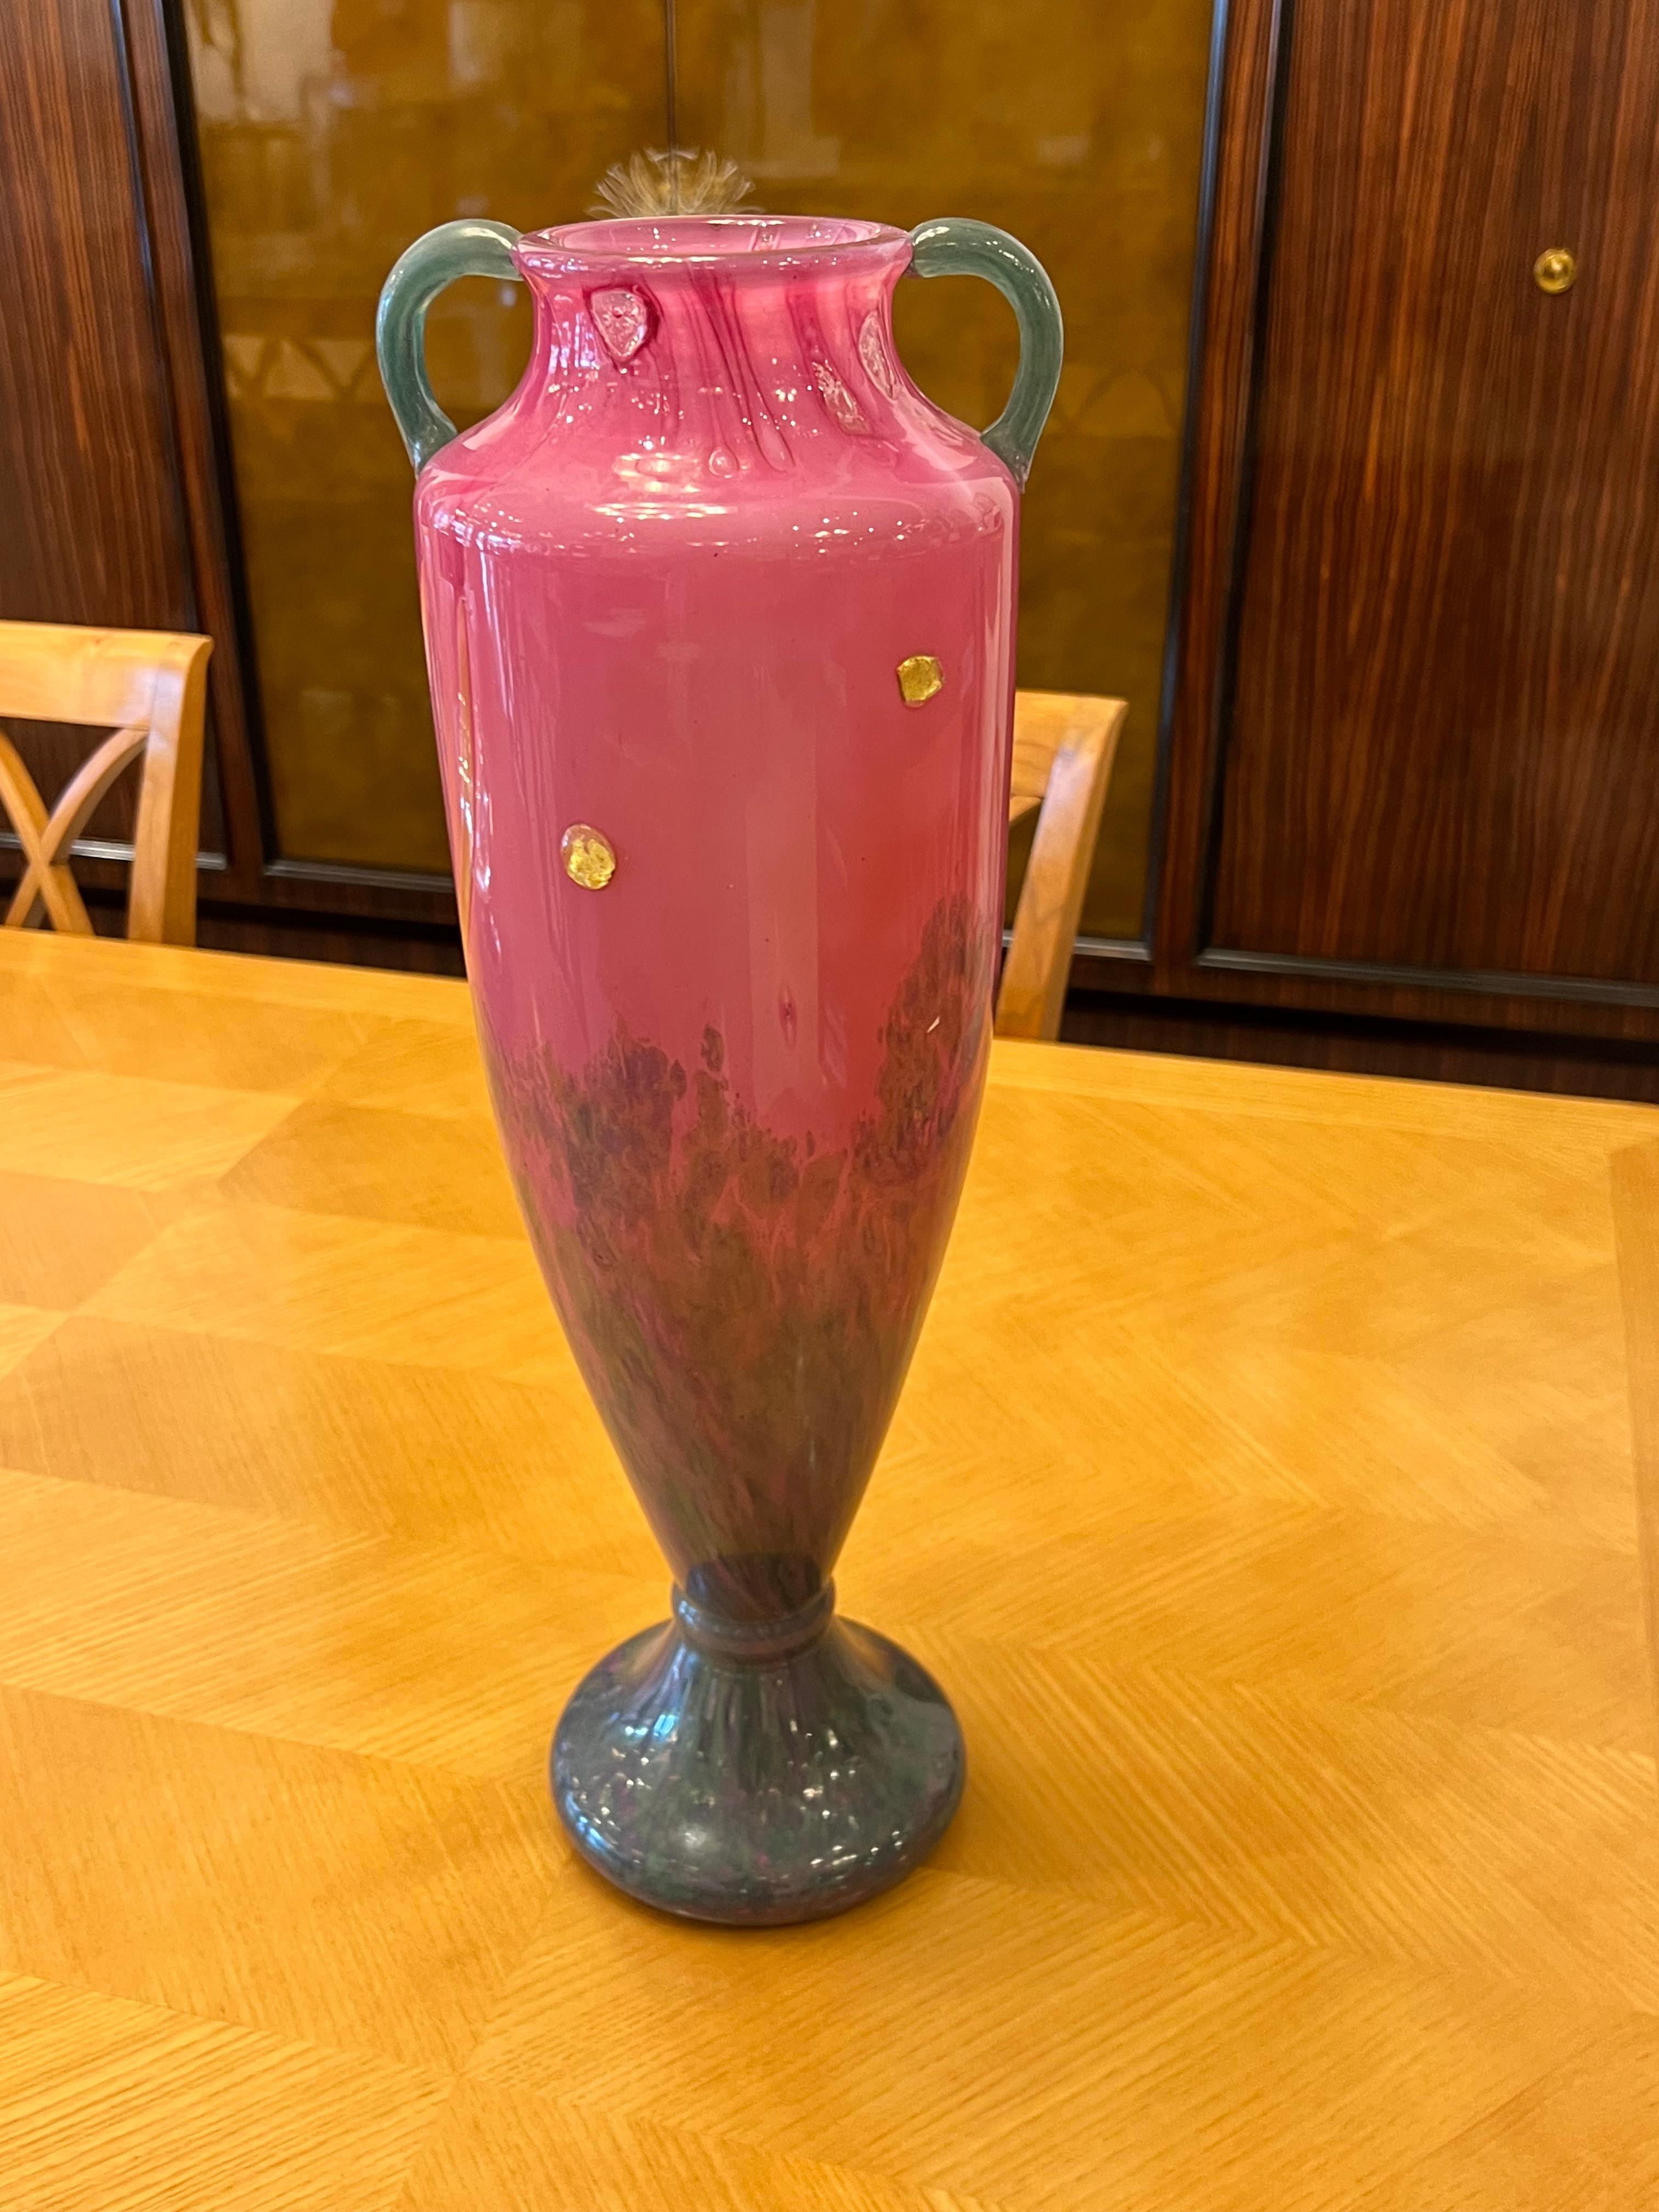 Art Deco hue pink glass vase with a jade green color accents and gold applications. 
Made in France.
Circa: 1925.